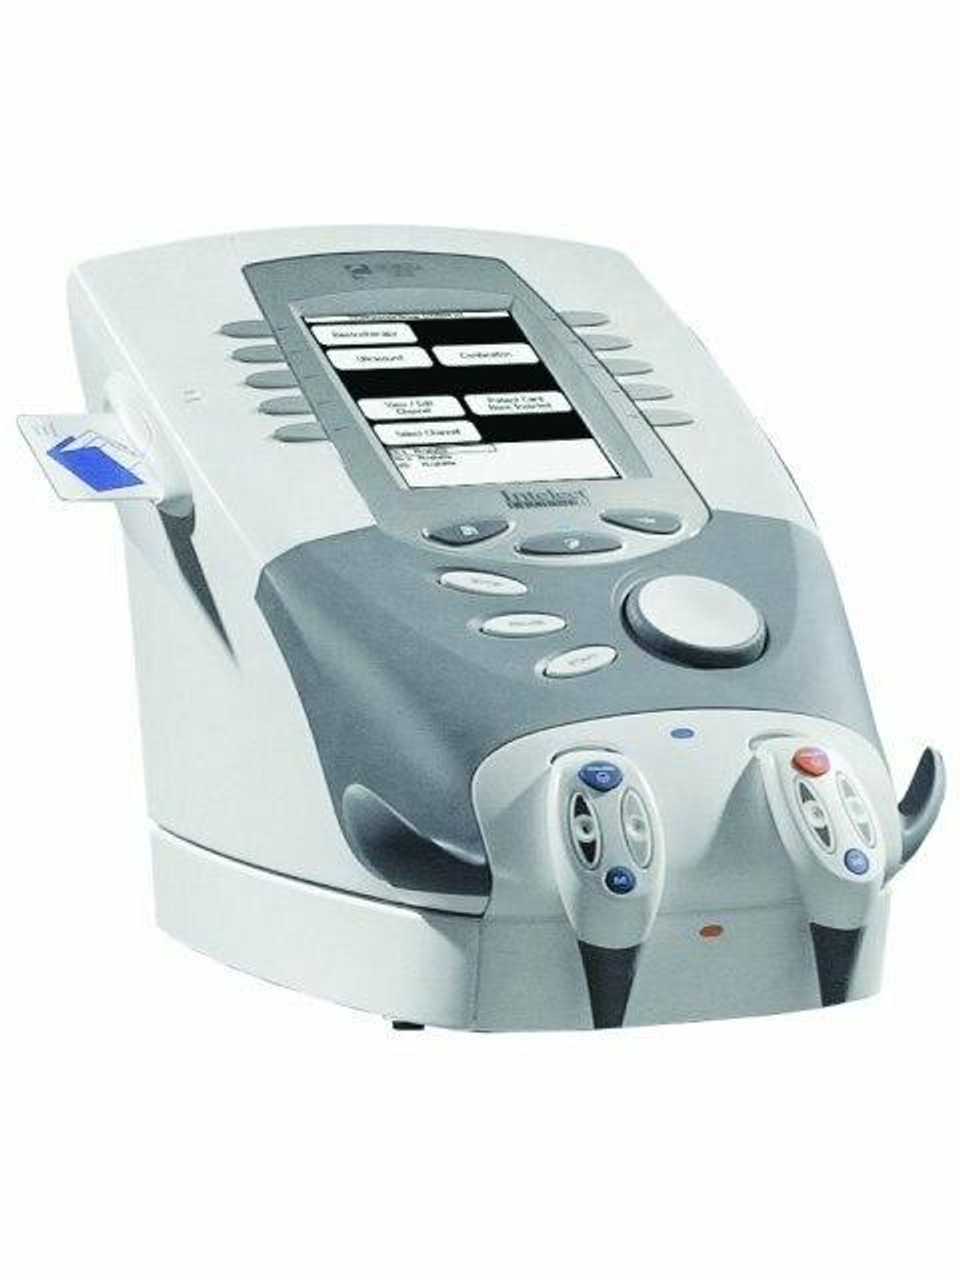 Intelect Legend XT Electrical Stimulation Machine, Electrotherapy Systems  for Rehabilitation and Physical Therapy